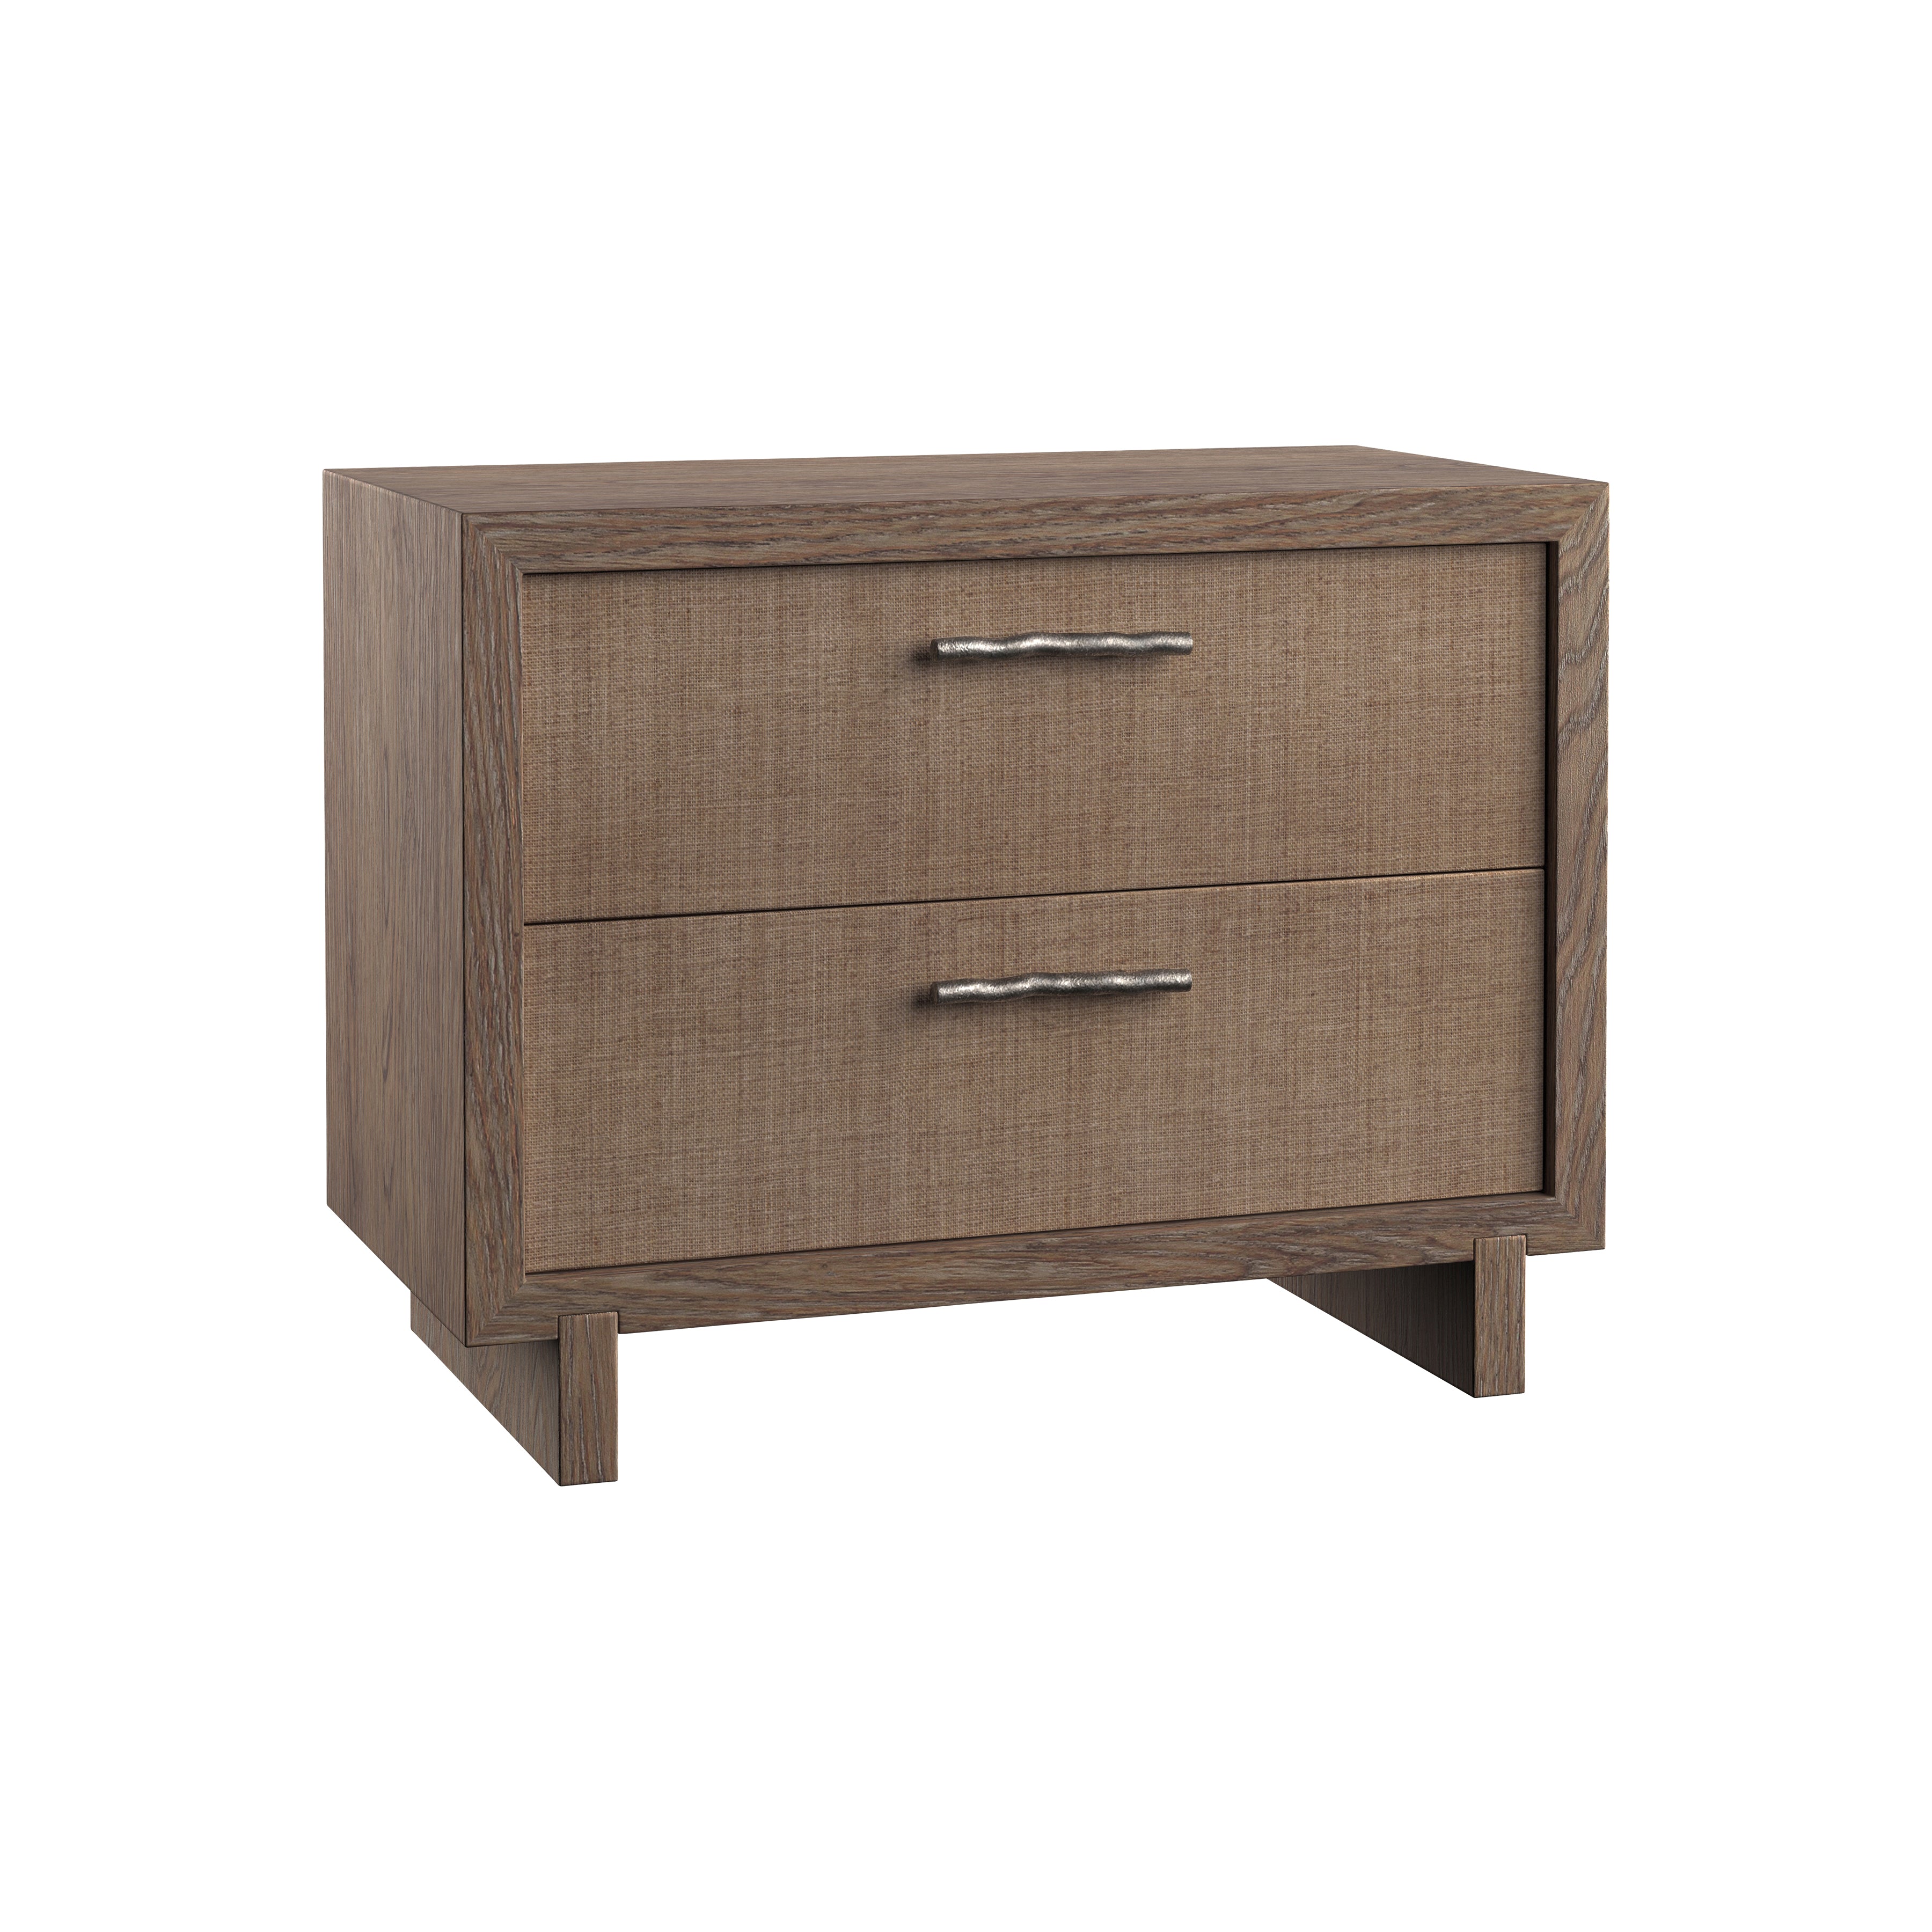 Casa Paros Nightstand with Woven Drawer Fronts